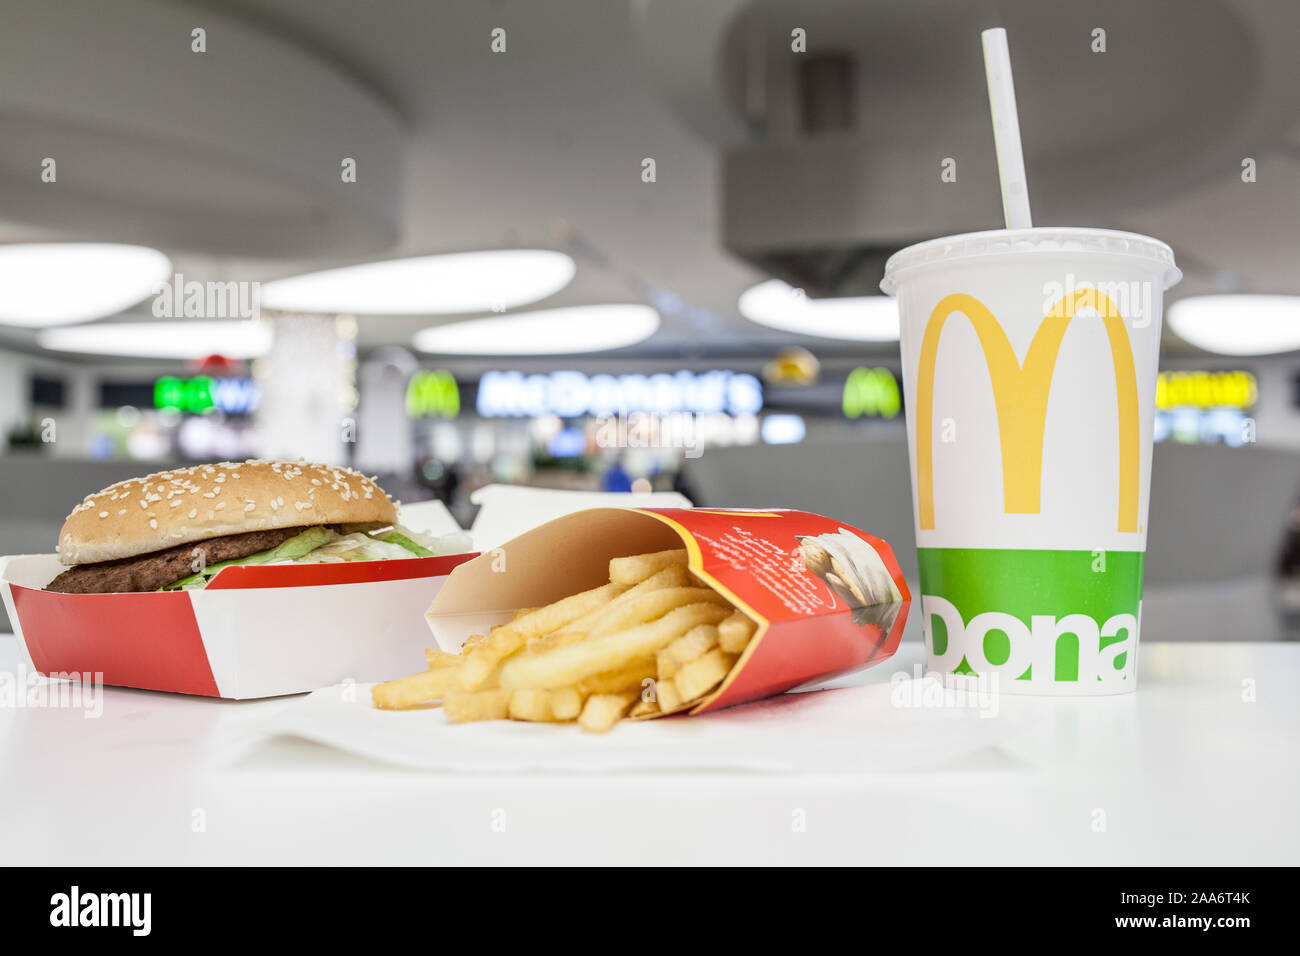 McDonald's Big Mac 100% pure beef sandwiched with refreshing Coca-Cola Coke, big yellow McDonald's M sign, logo on cup, French fries Stock Photo